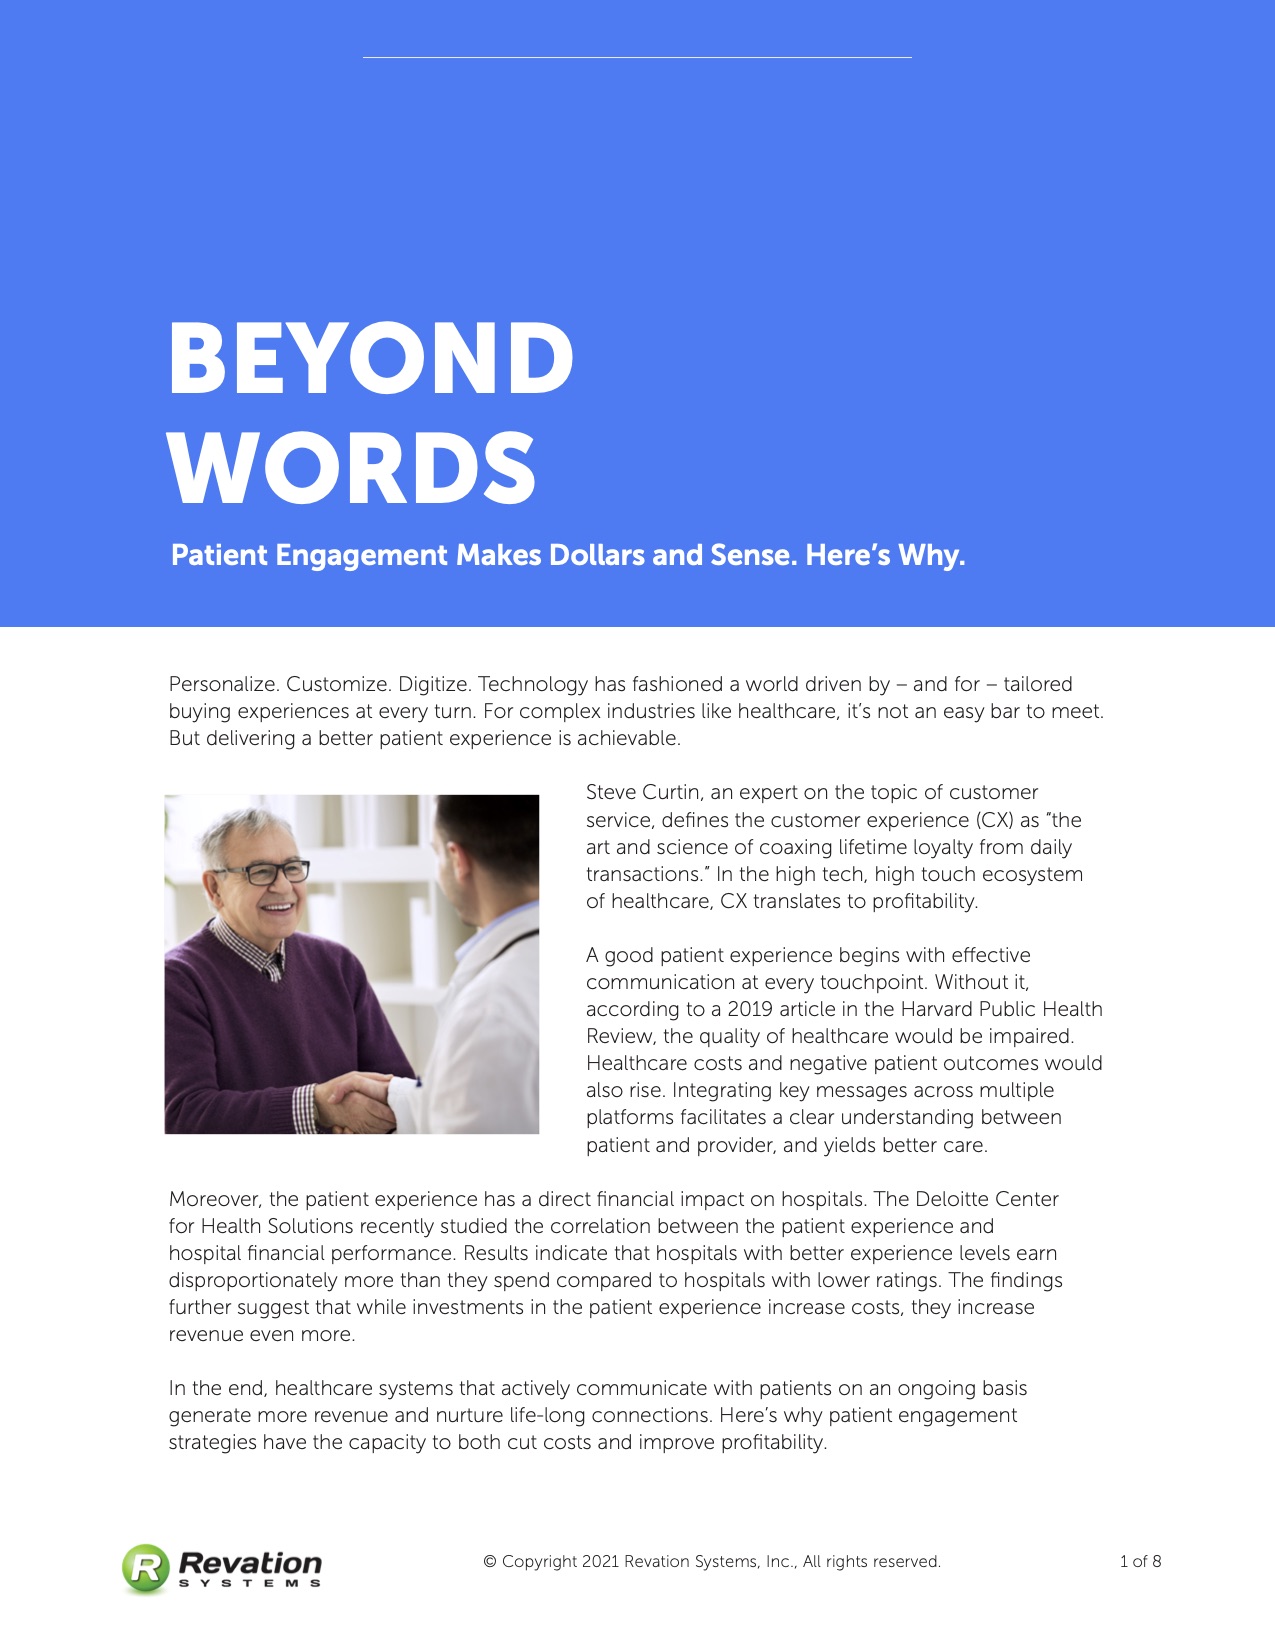 Beyond Words_Patient Engagement Makes Dollars and Sense